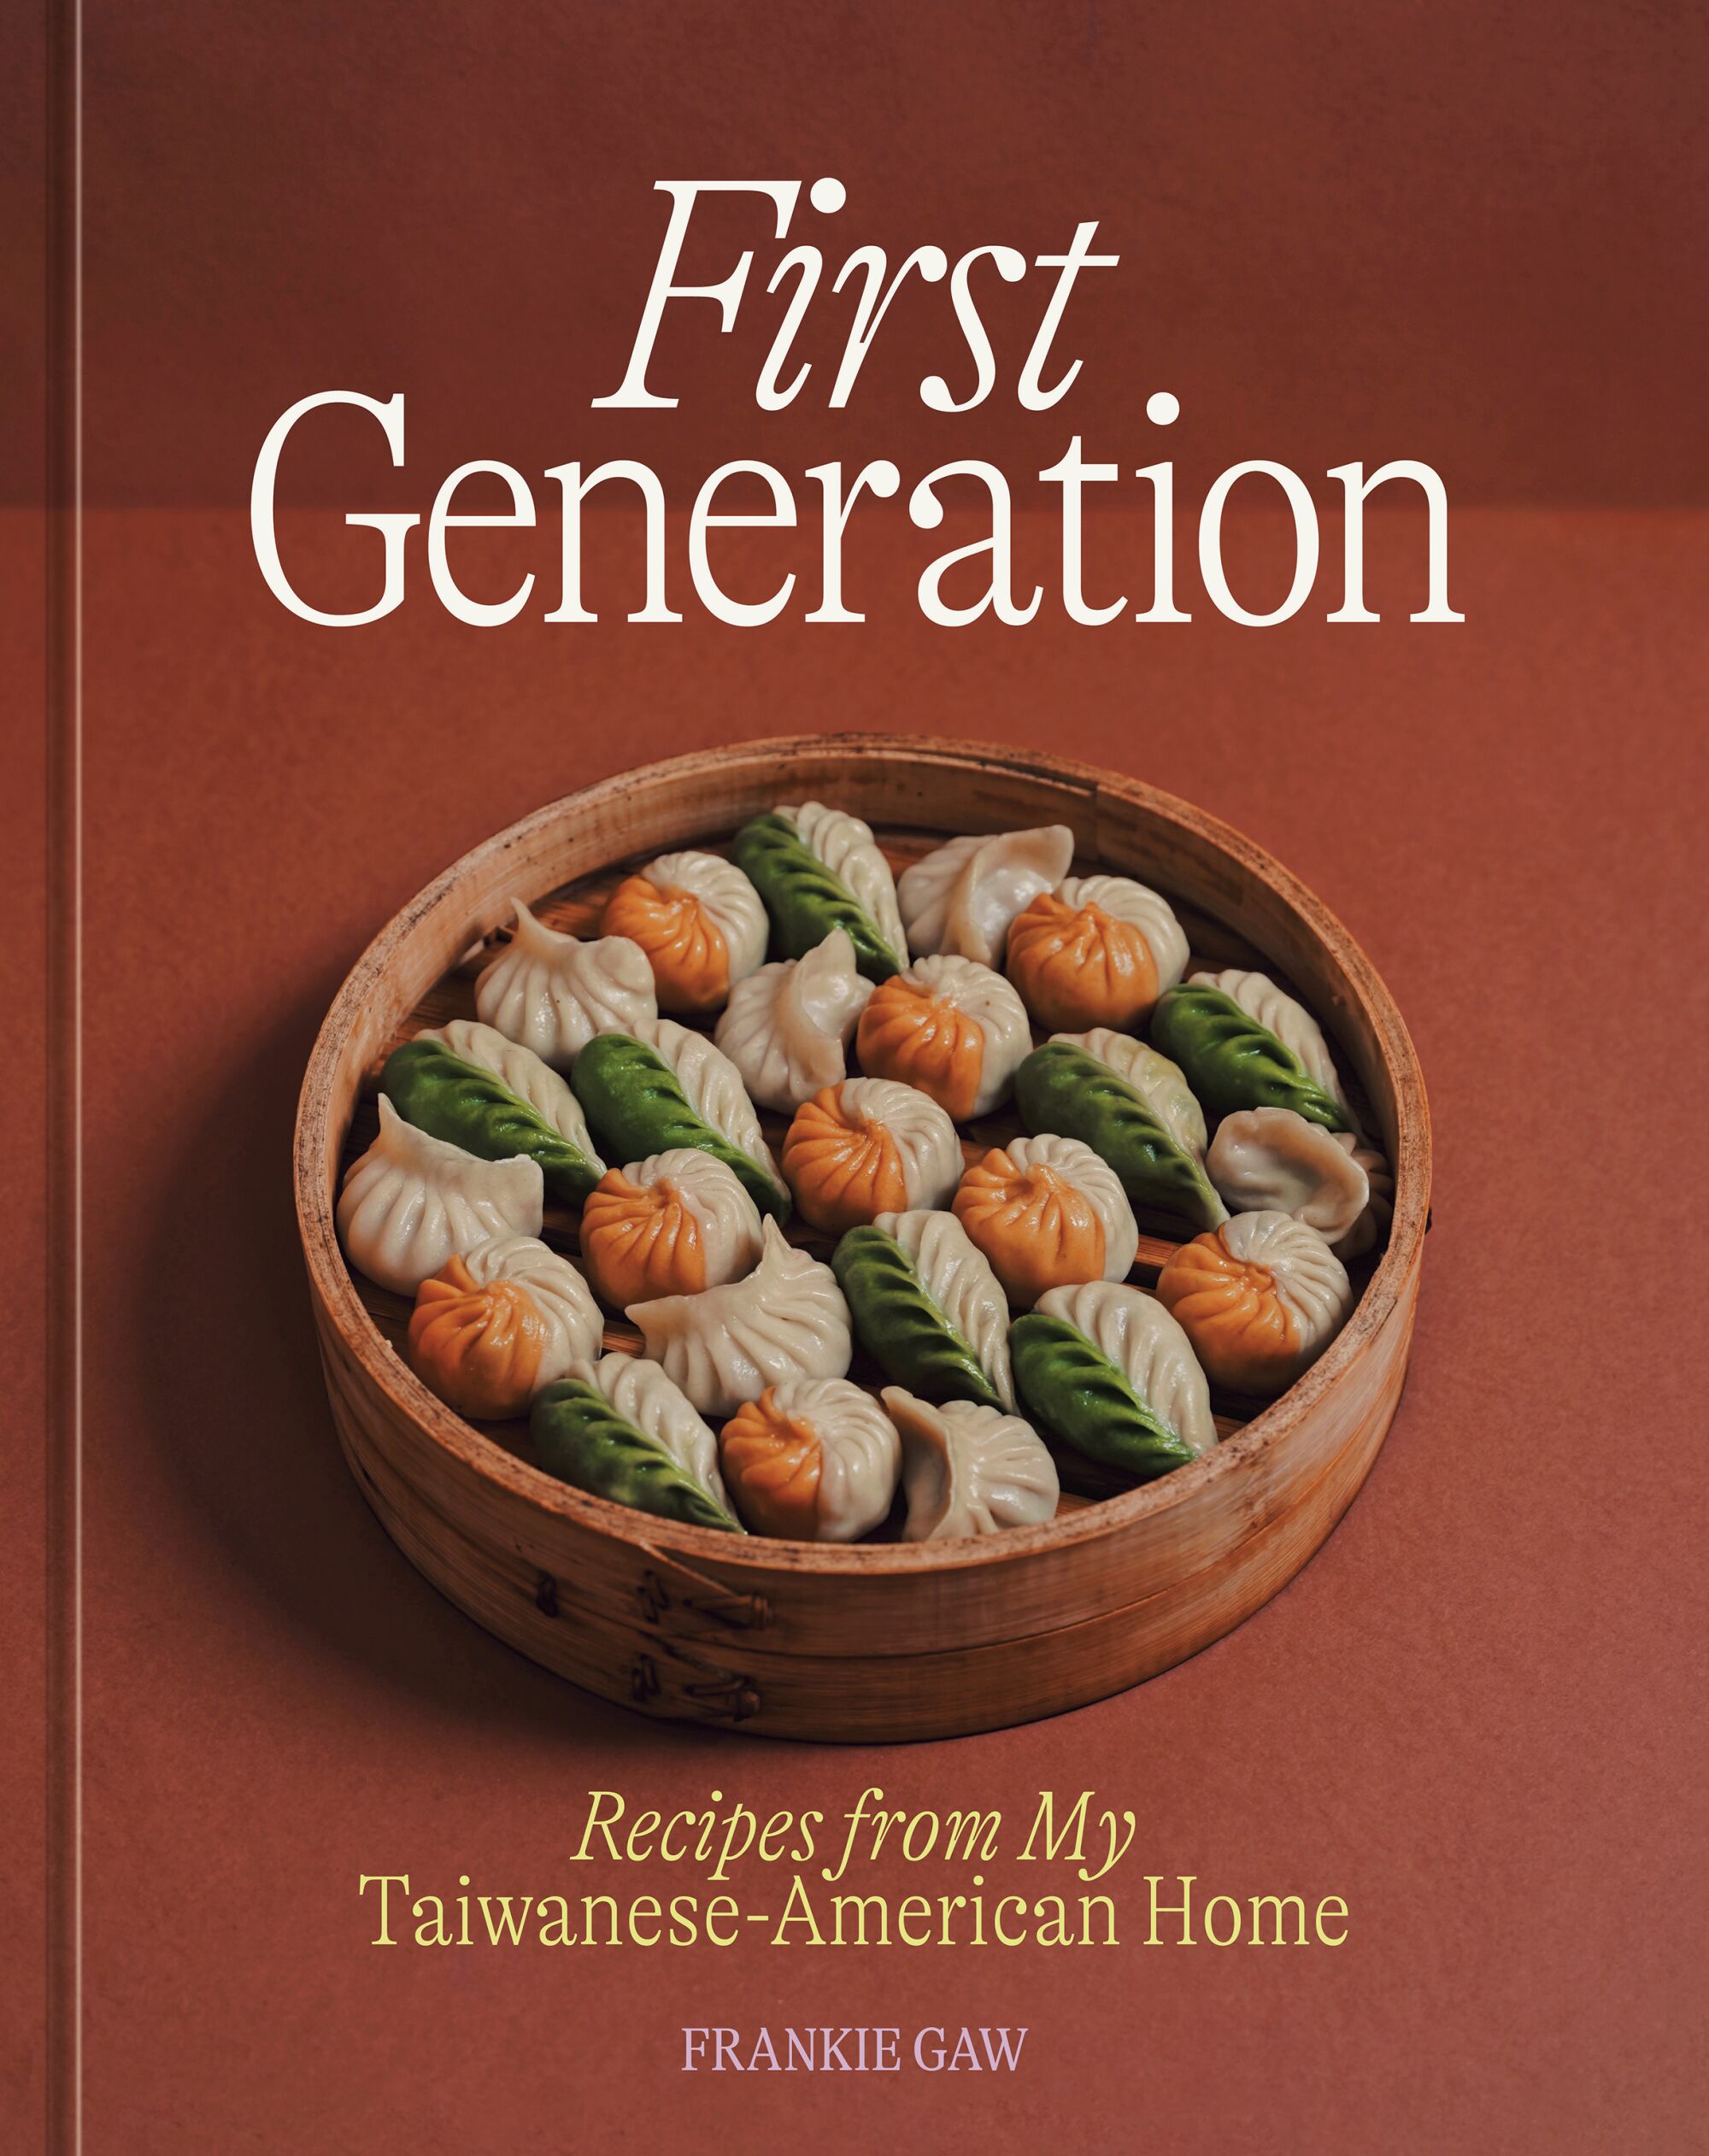 "First Generation: Recipes From My Taiwanese-American Home"